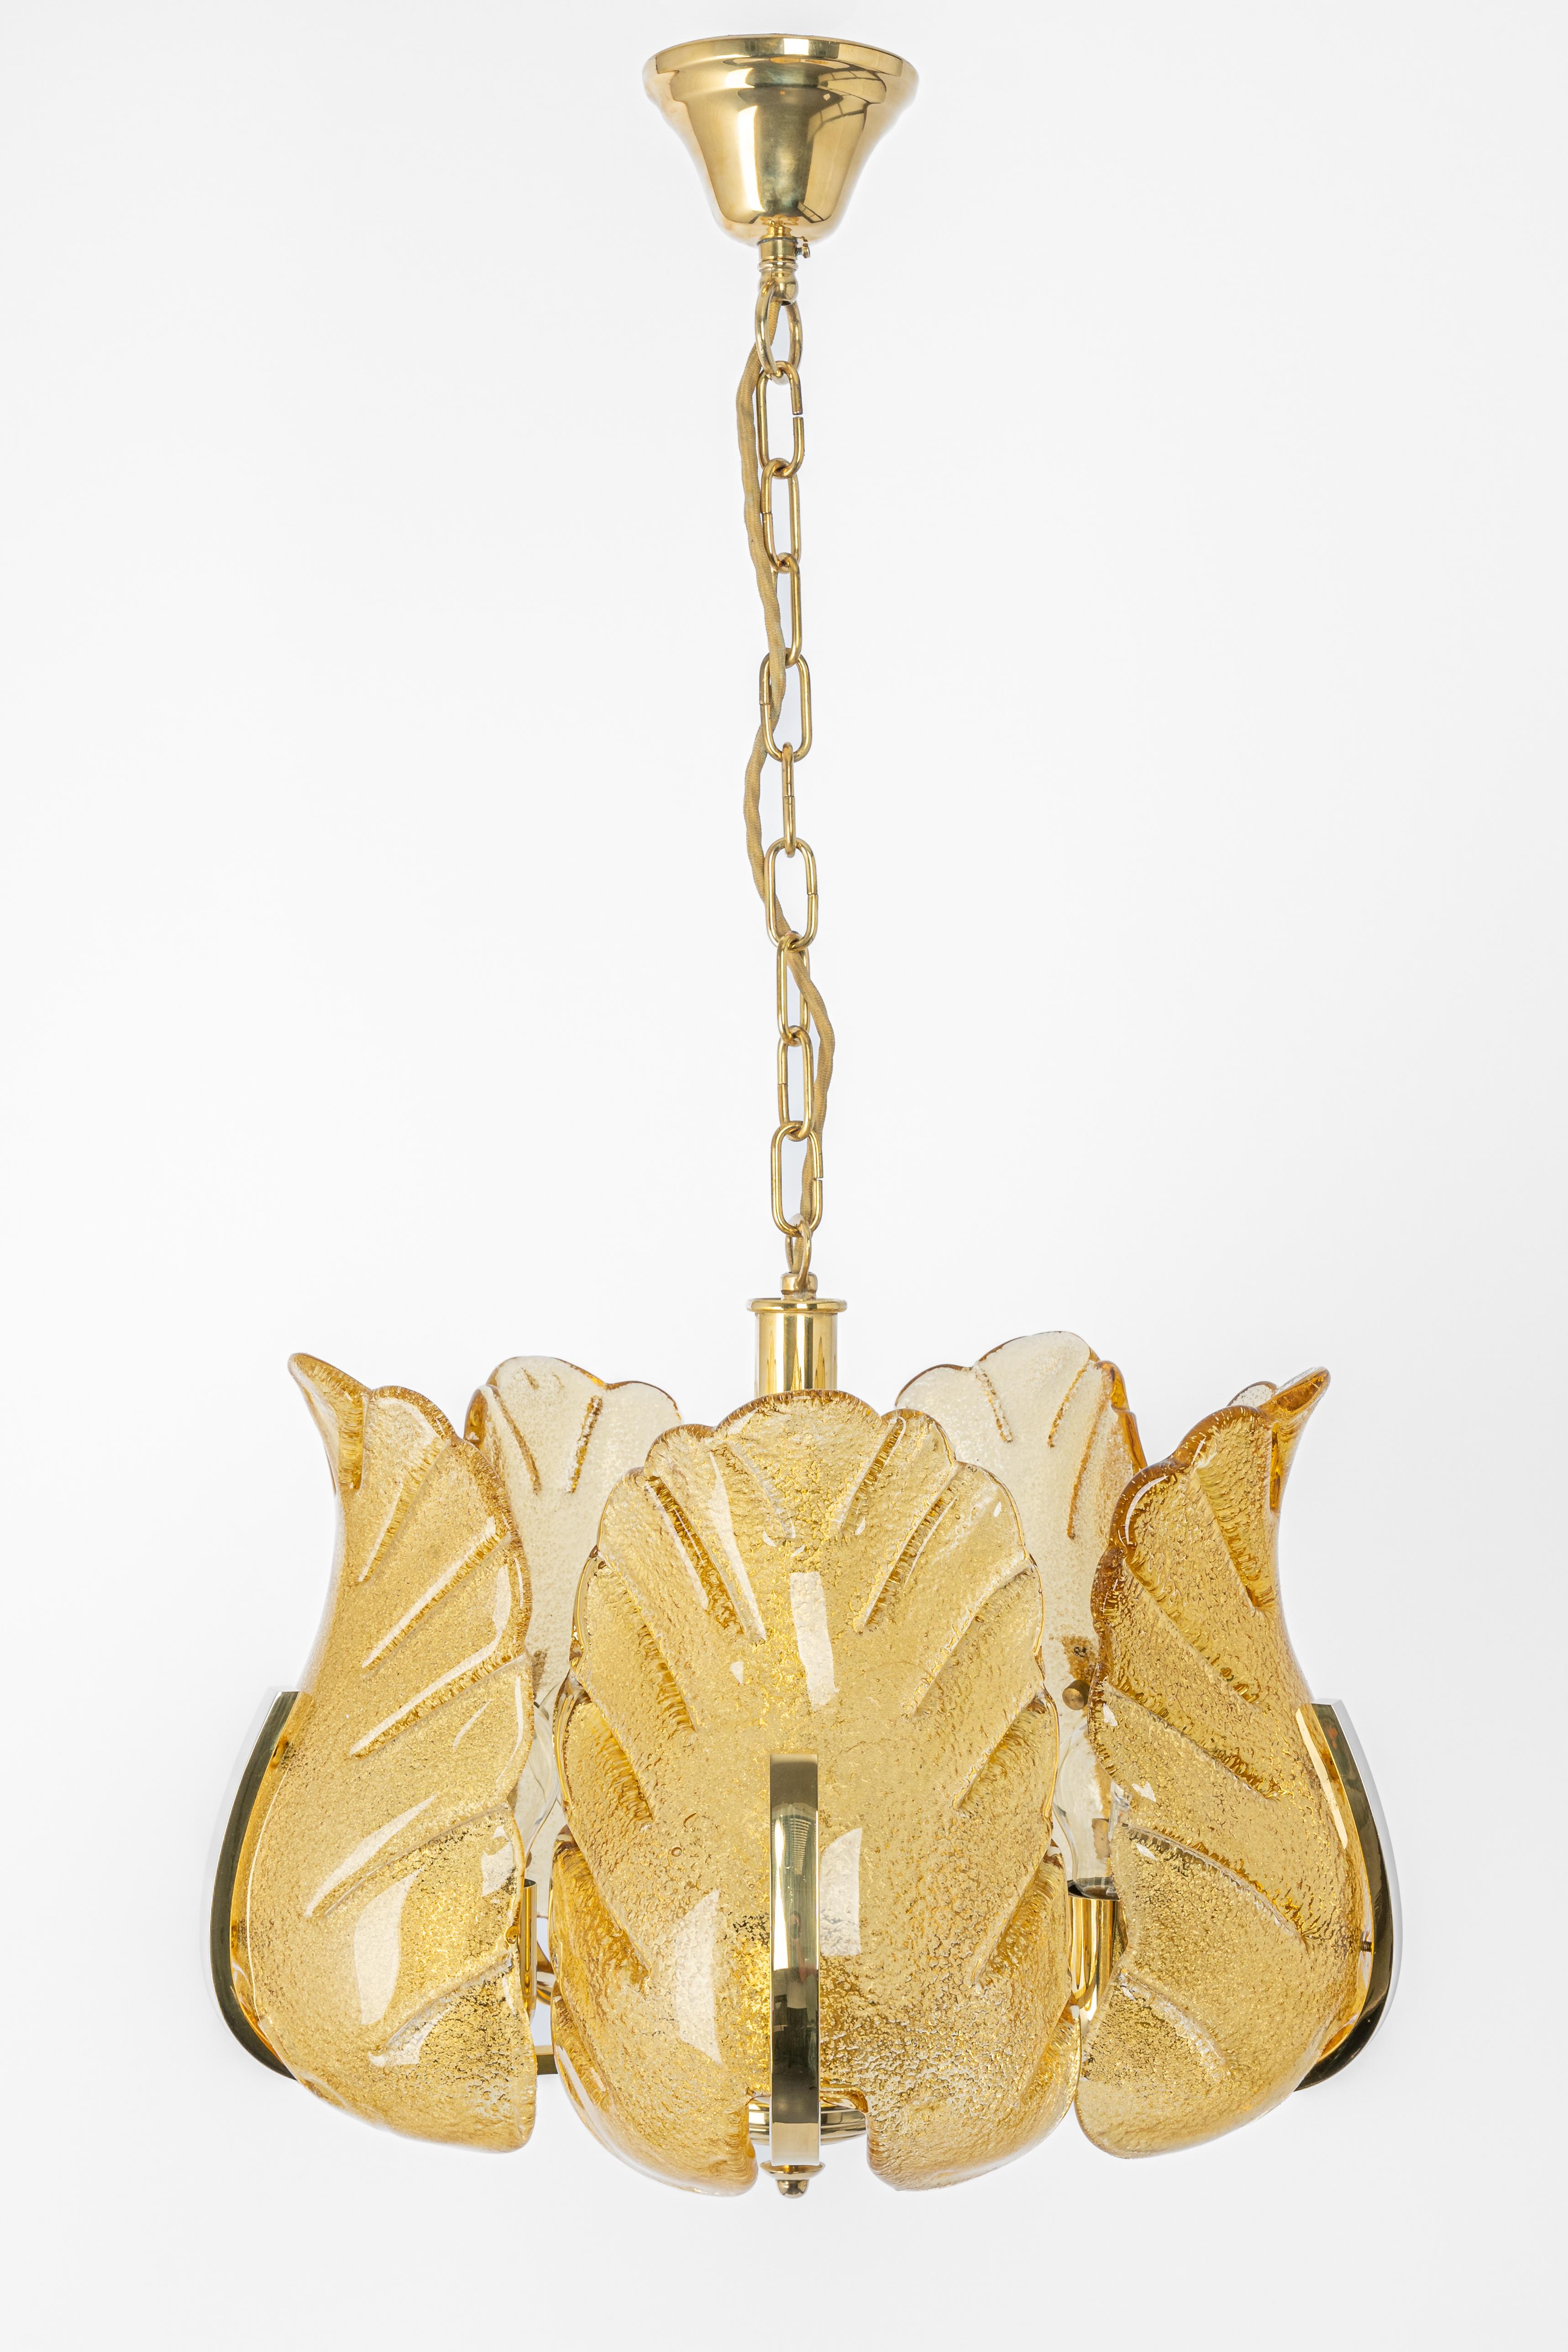 Stunning Carl Fagerlund Chandelier Murano Glass Leaves, 1960s For Sale 6